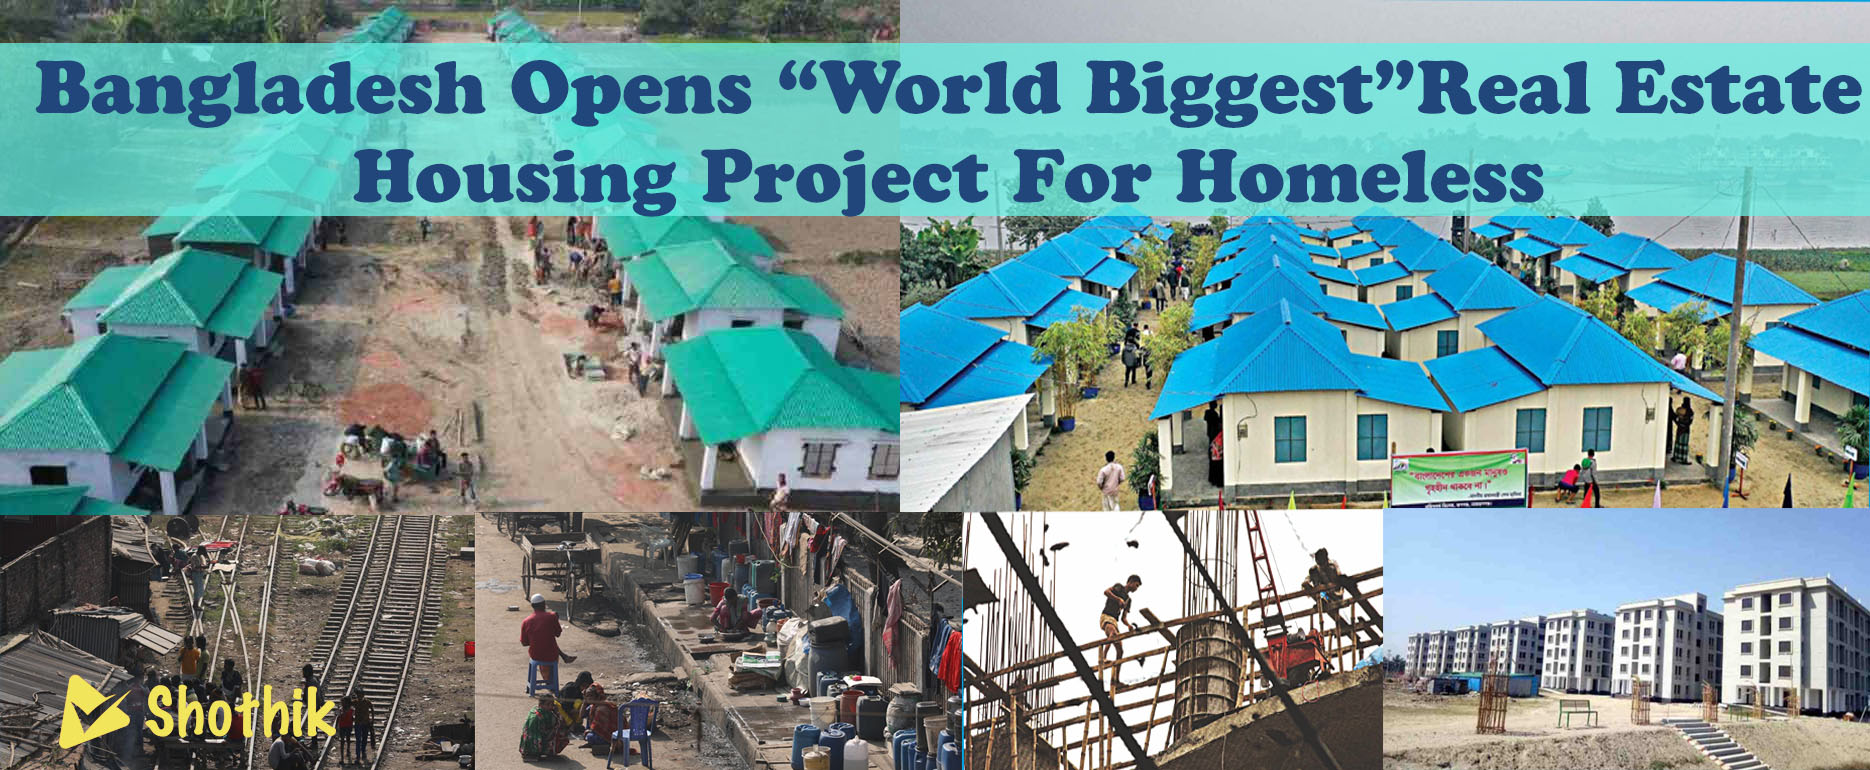 Bangladesh opens “World Biggest” Real Estate housing project for homeless